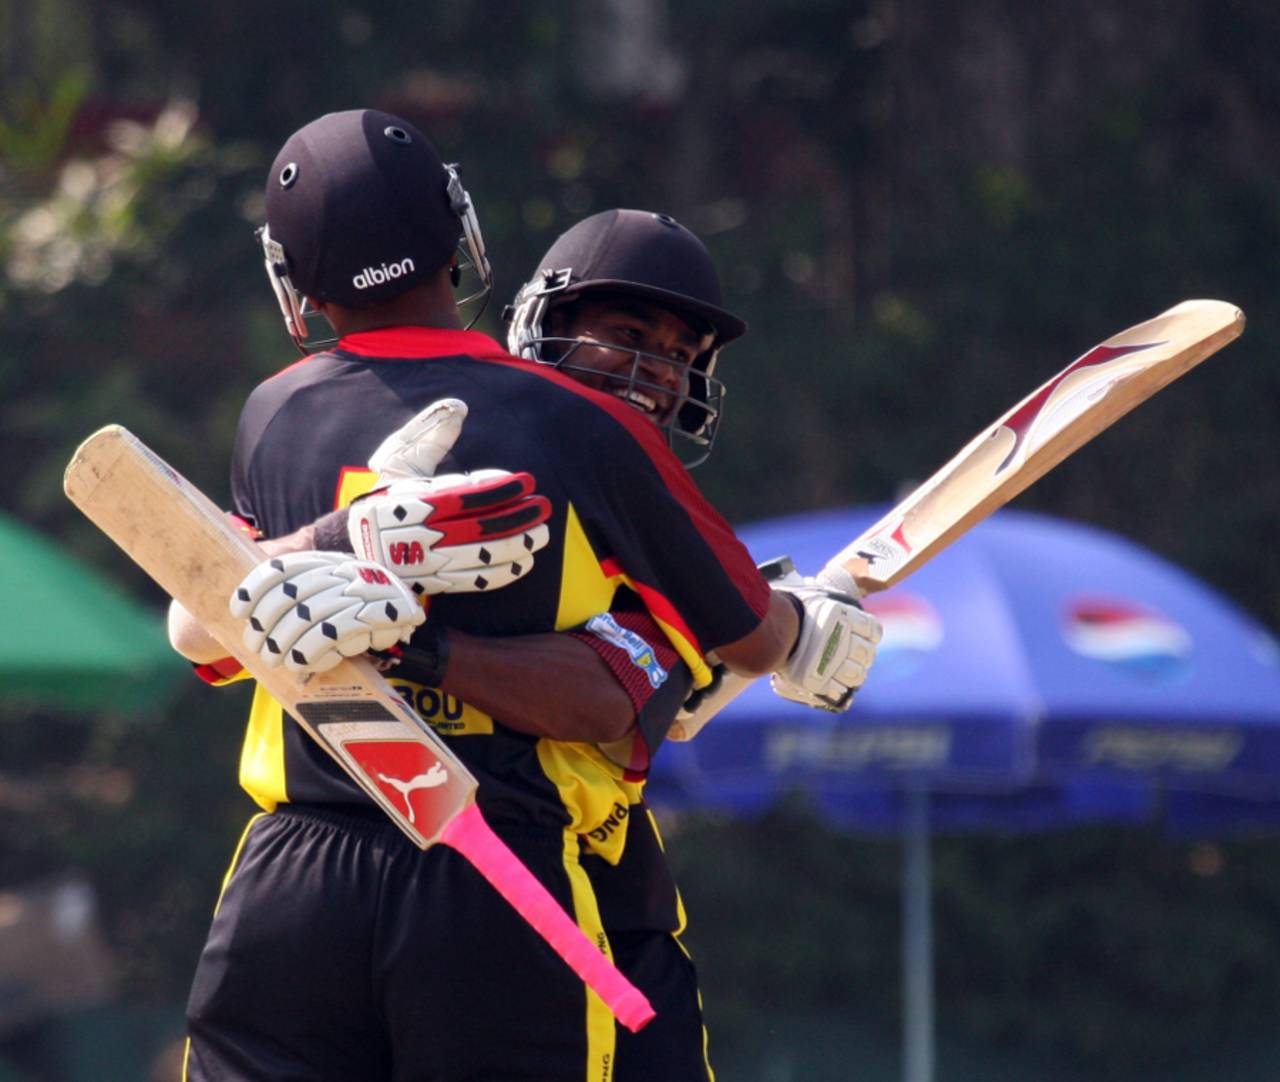 Over the last few years, PNG's cricket story has been: one step back, two steps forward&nbsp;&nbsp;&bull;&nbsp;&nbsp;ICC/Cricket Europe